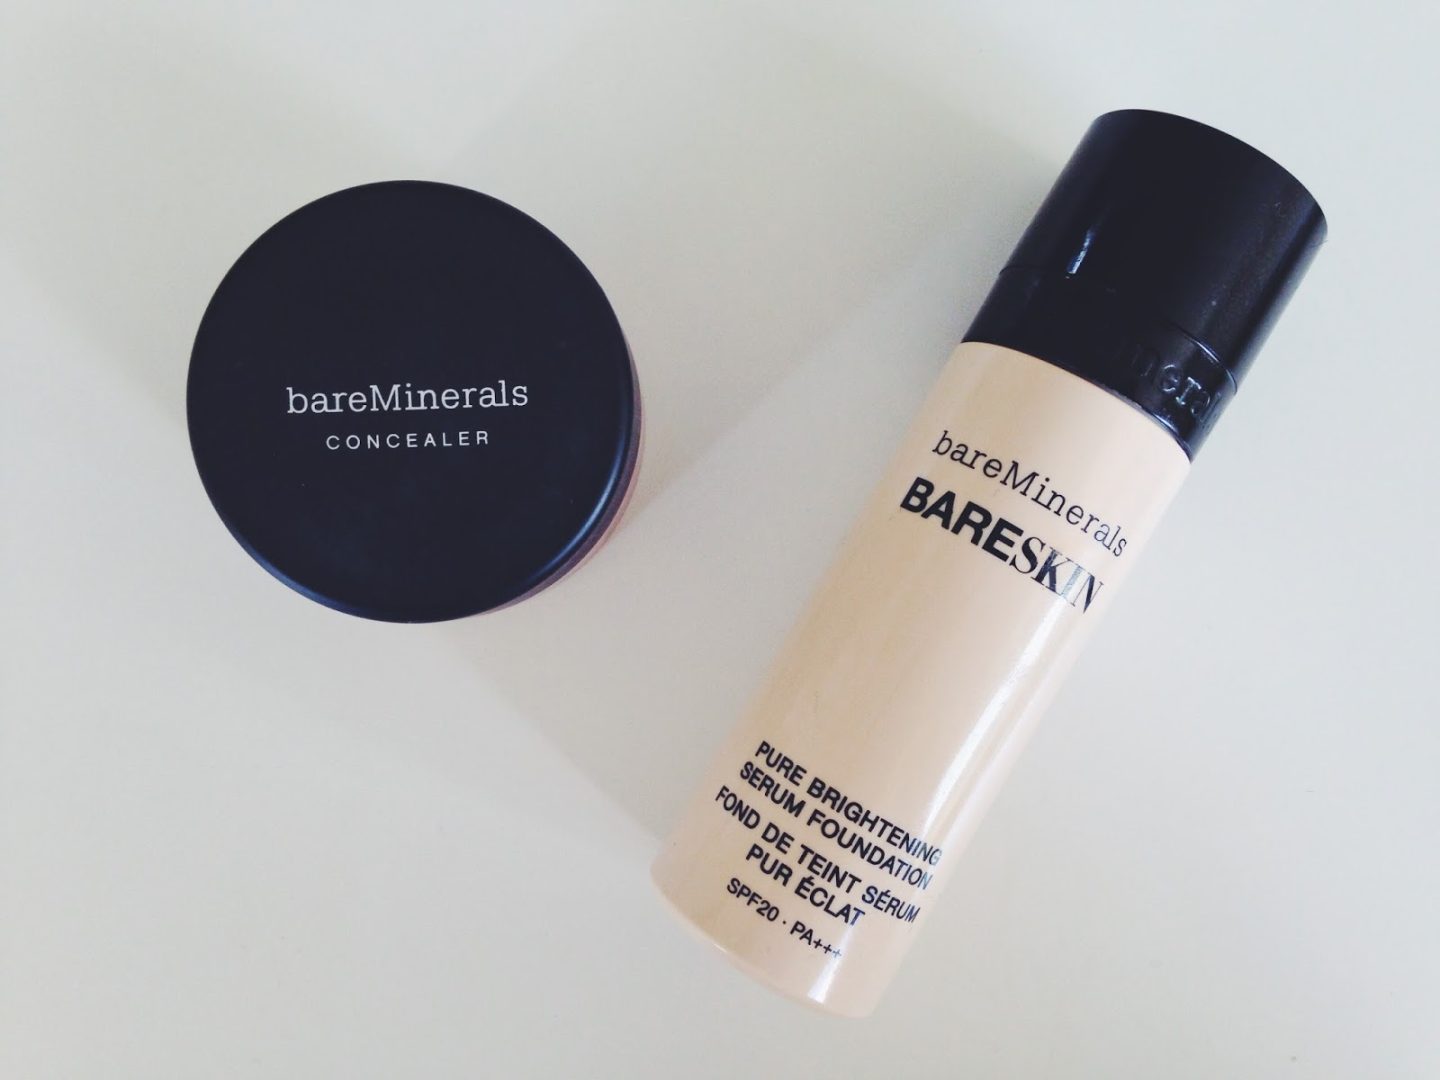 Two Bare Minerals products